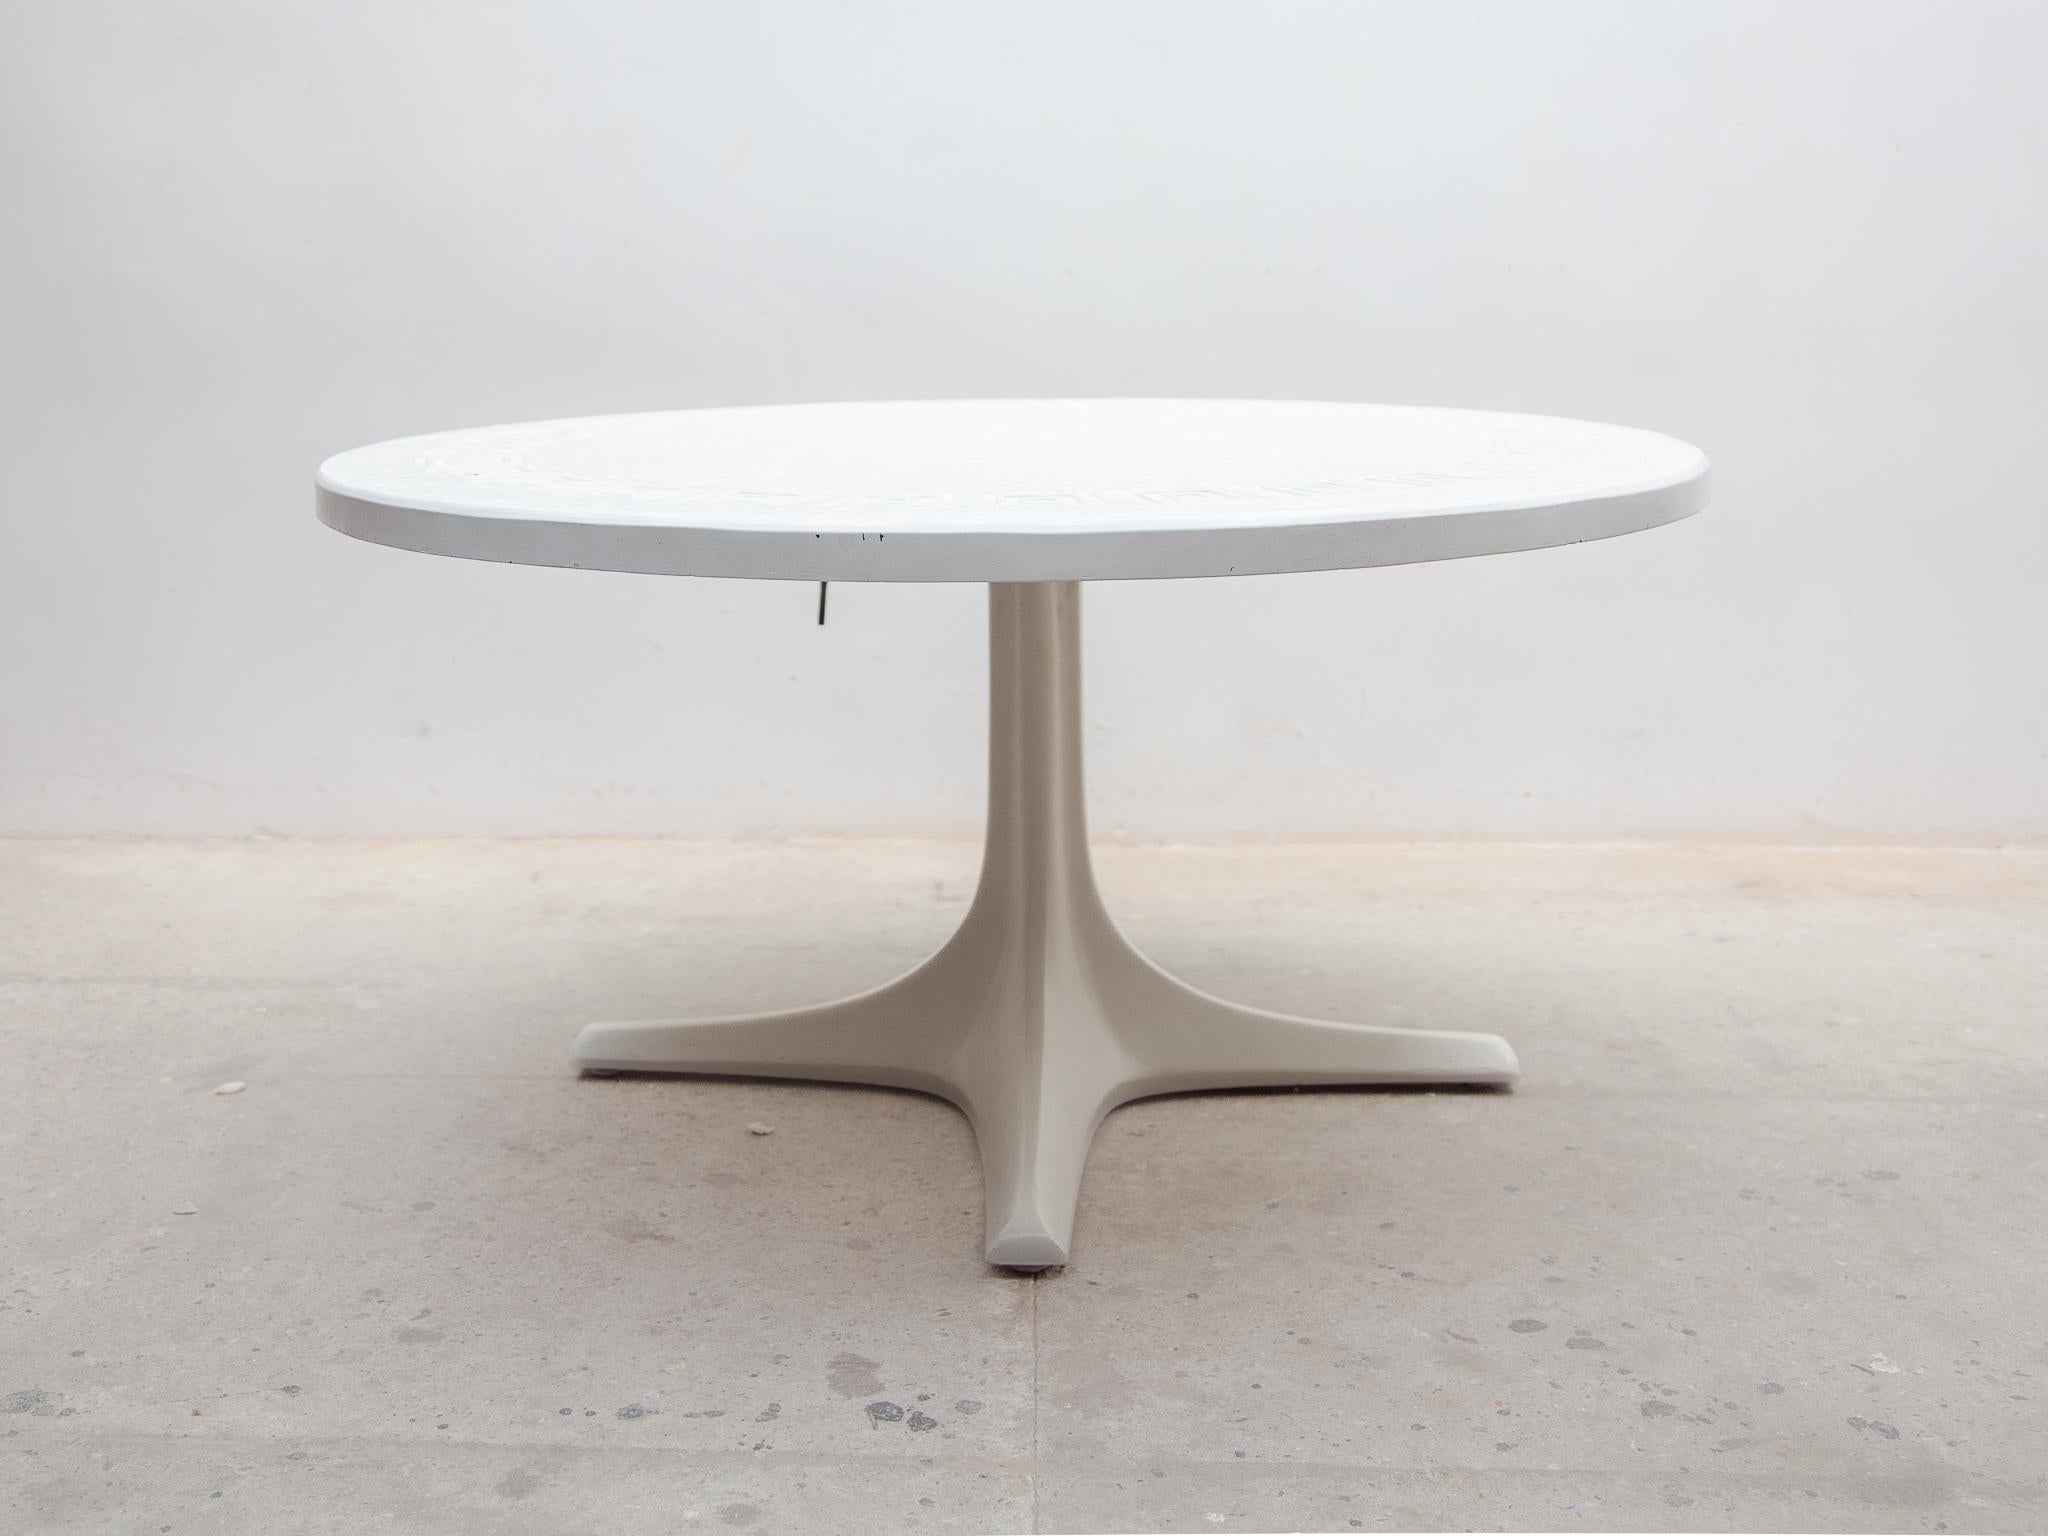 Coffee table from Ilse Möbel, Germany. Height adjustable coffee table up to a dining table. Beautiful round top table with a meander motif in bakelite and white coated at a metal adjustable base. Labeled by Ilse Mobel, Germany 1960s.